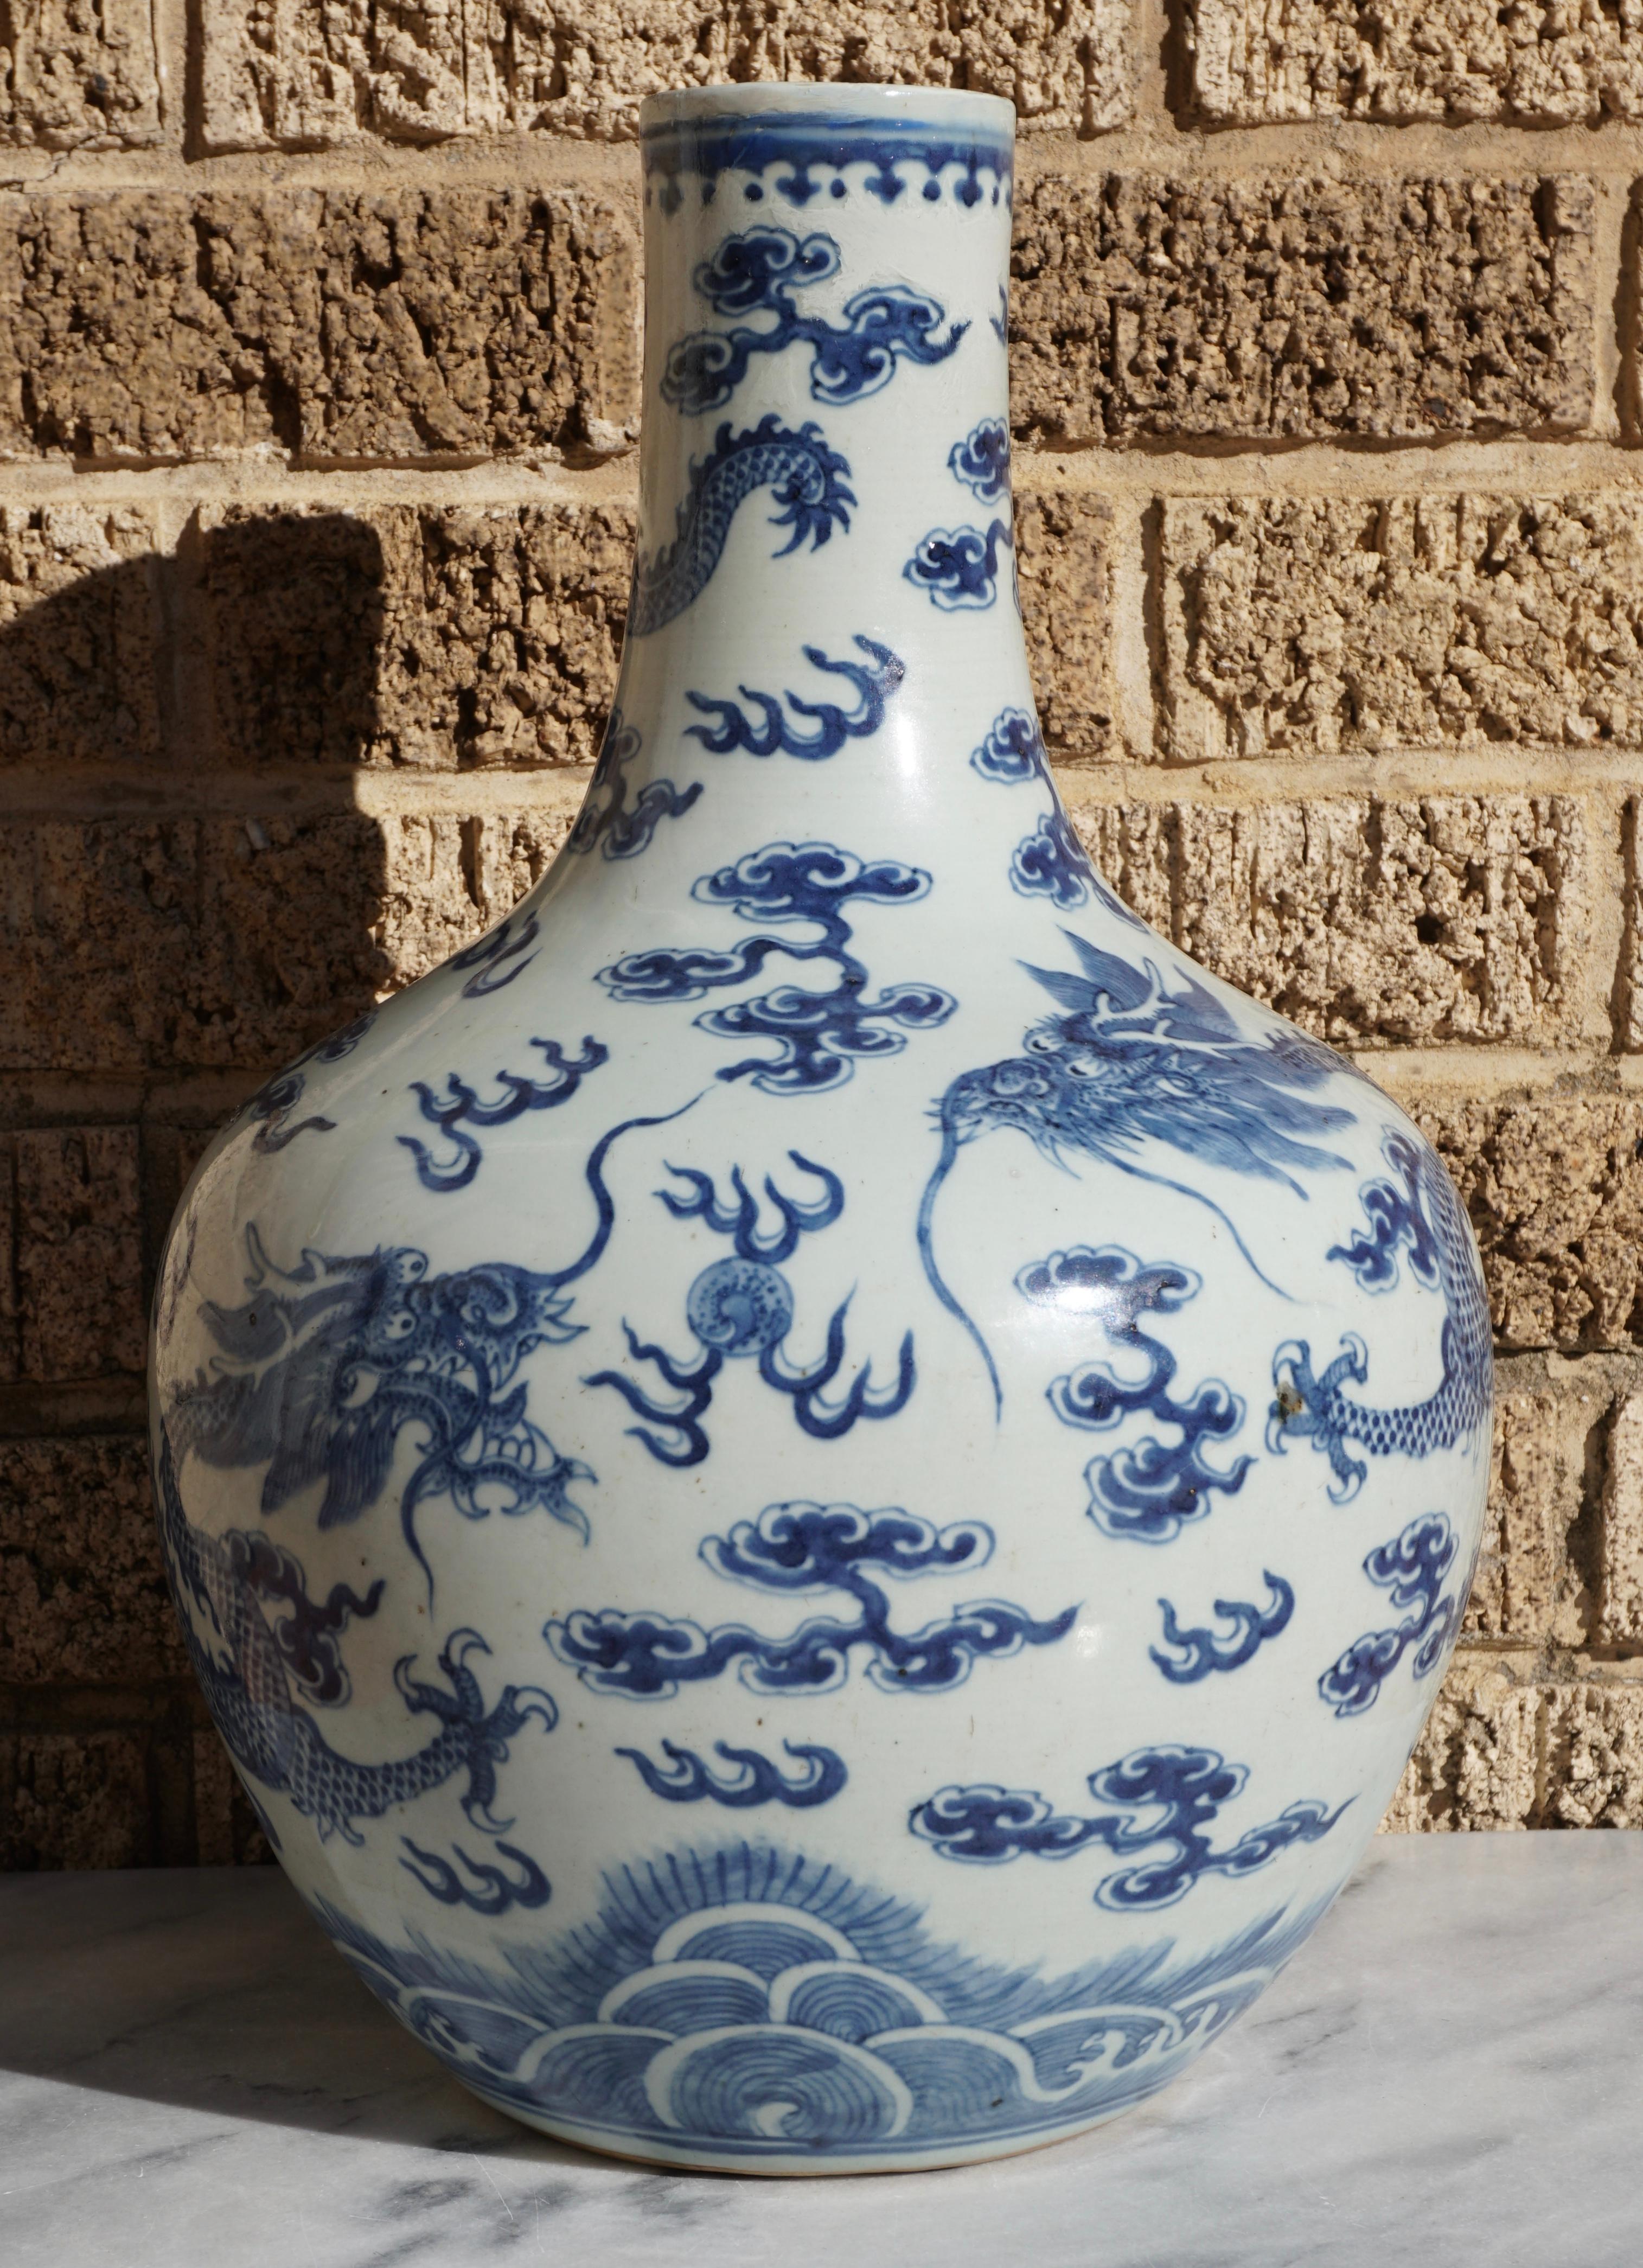 19th century blue and white ceramic porcelain bottle neck vase with two dragons chasing the elusive pearl of wisdom through the clouds over waves. Rim has repairs and displays beautifully. Hand painted in beautiful underglaze. 

Height:15